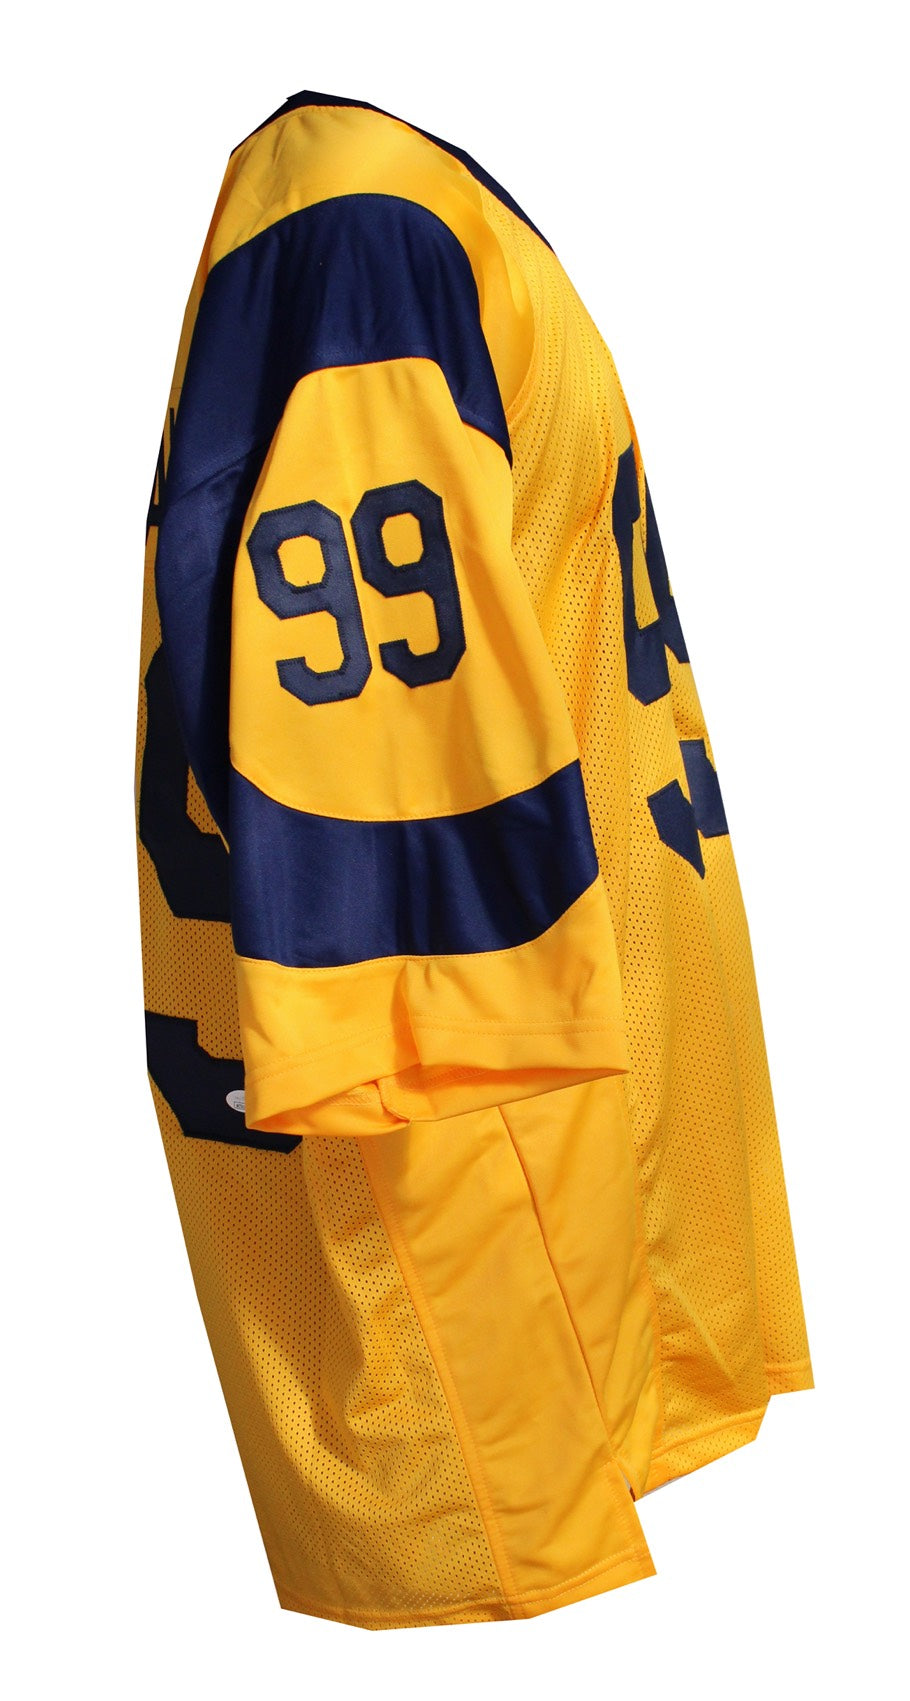 Aaron Donald Autographed Los Angeles Rams Color Rush Yellow Custom Jersey -  JSA Authentic